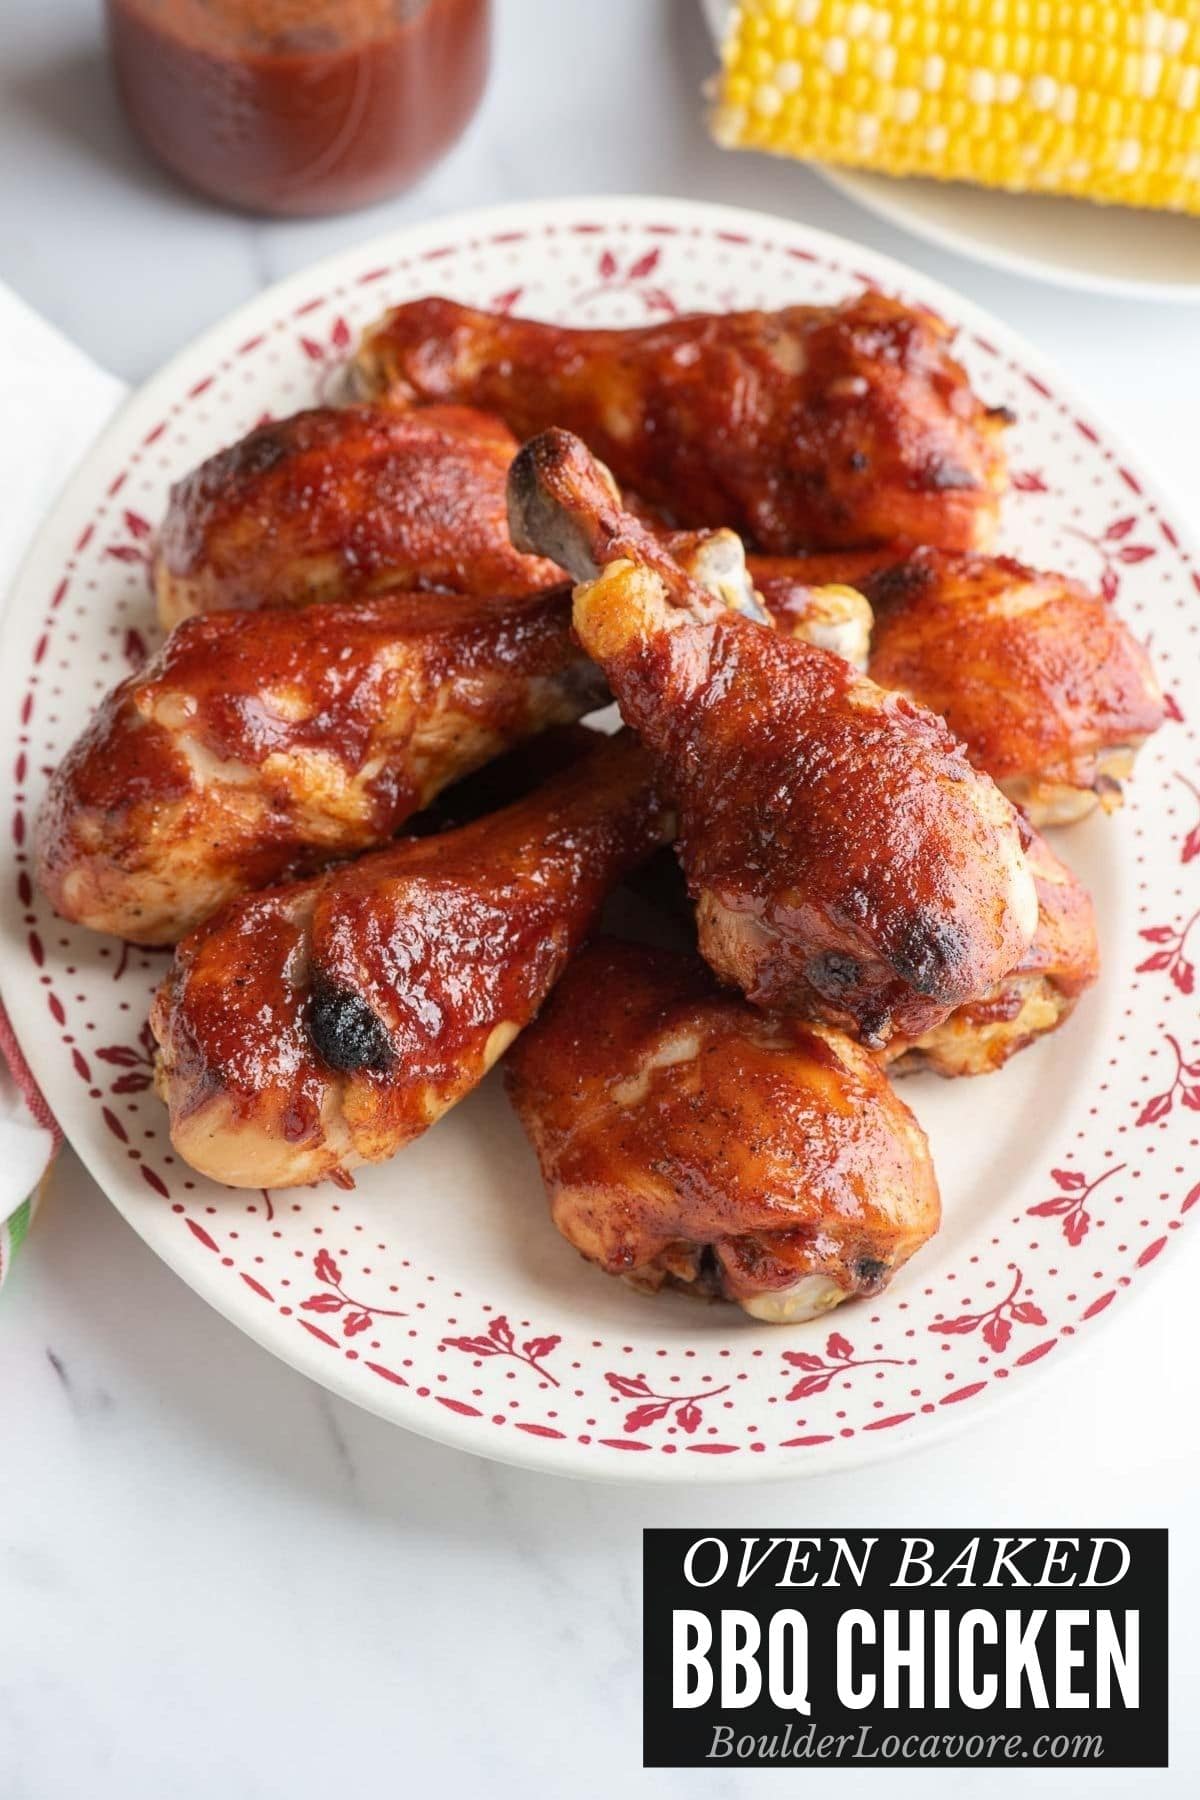 Oven Baked BBQ Chicken title image